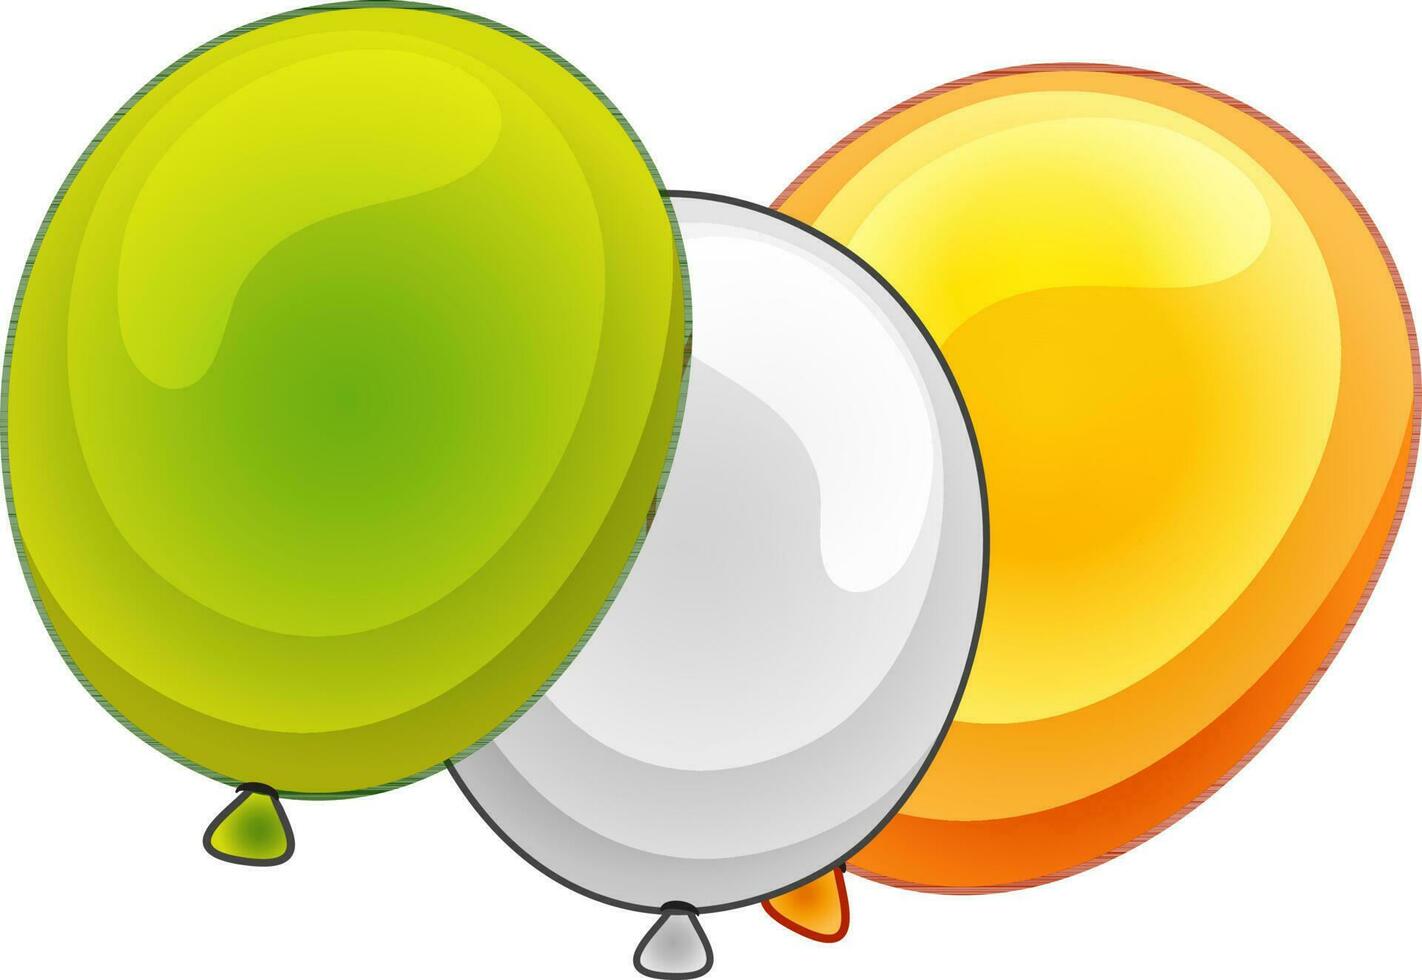 Flat illustration of Indian Tricolor Balloons. vector